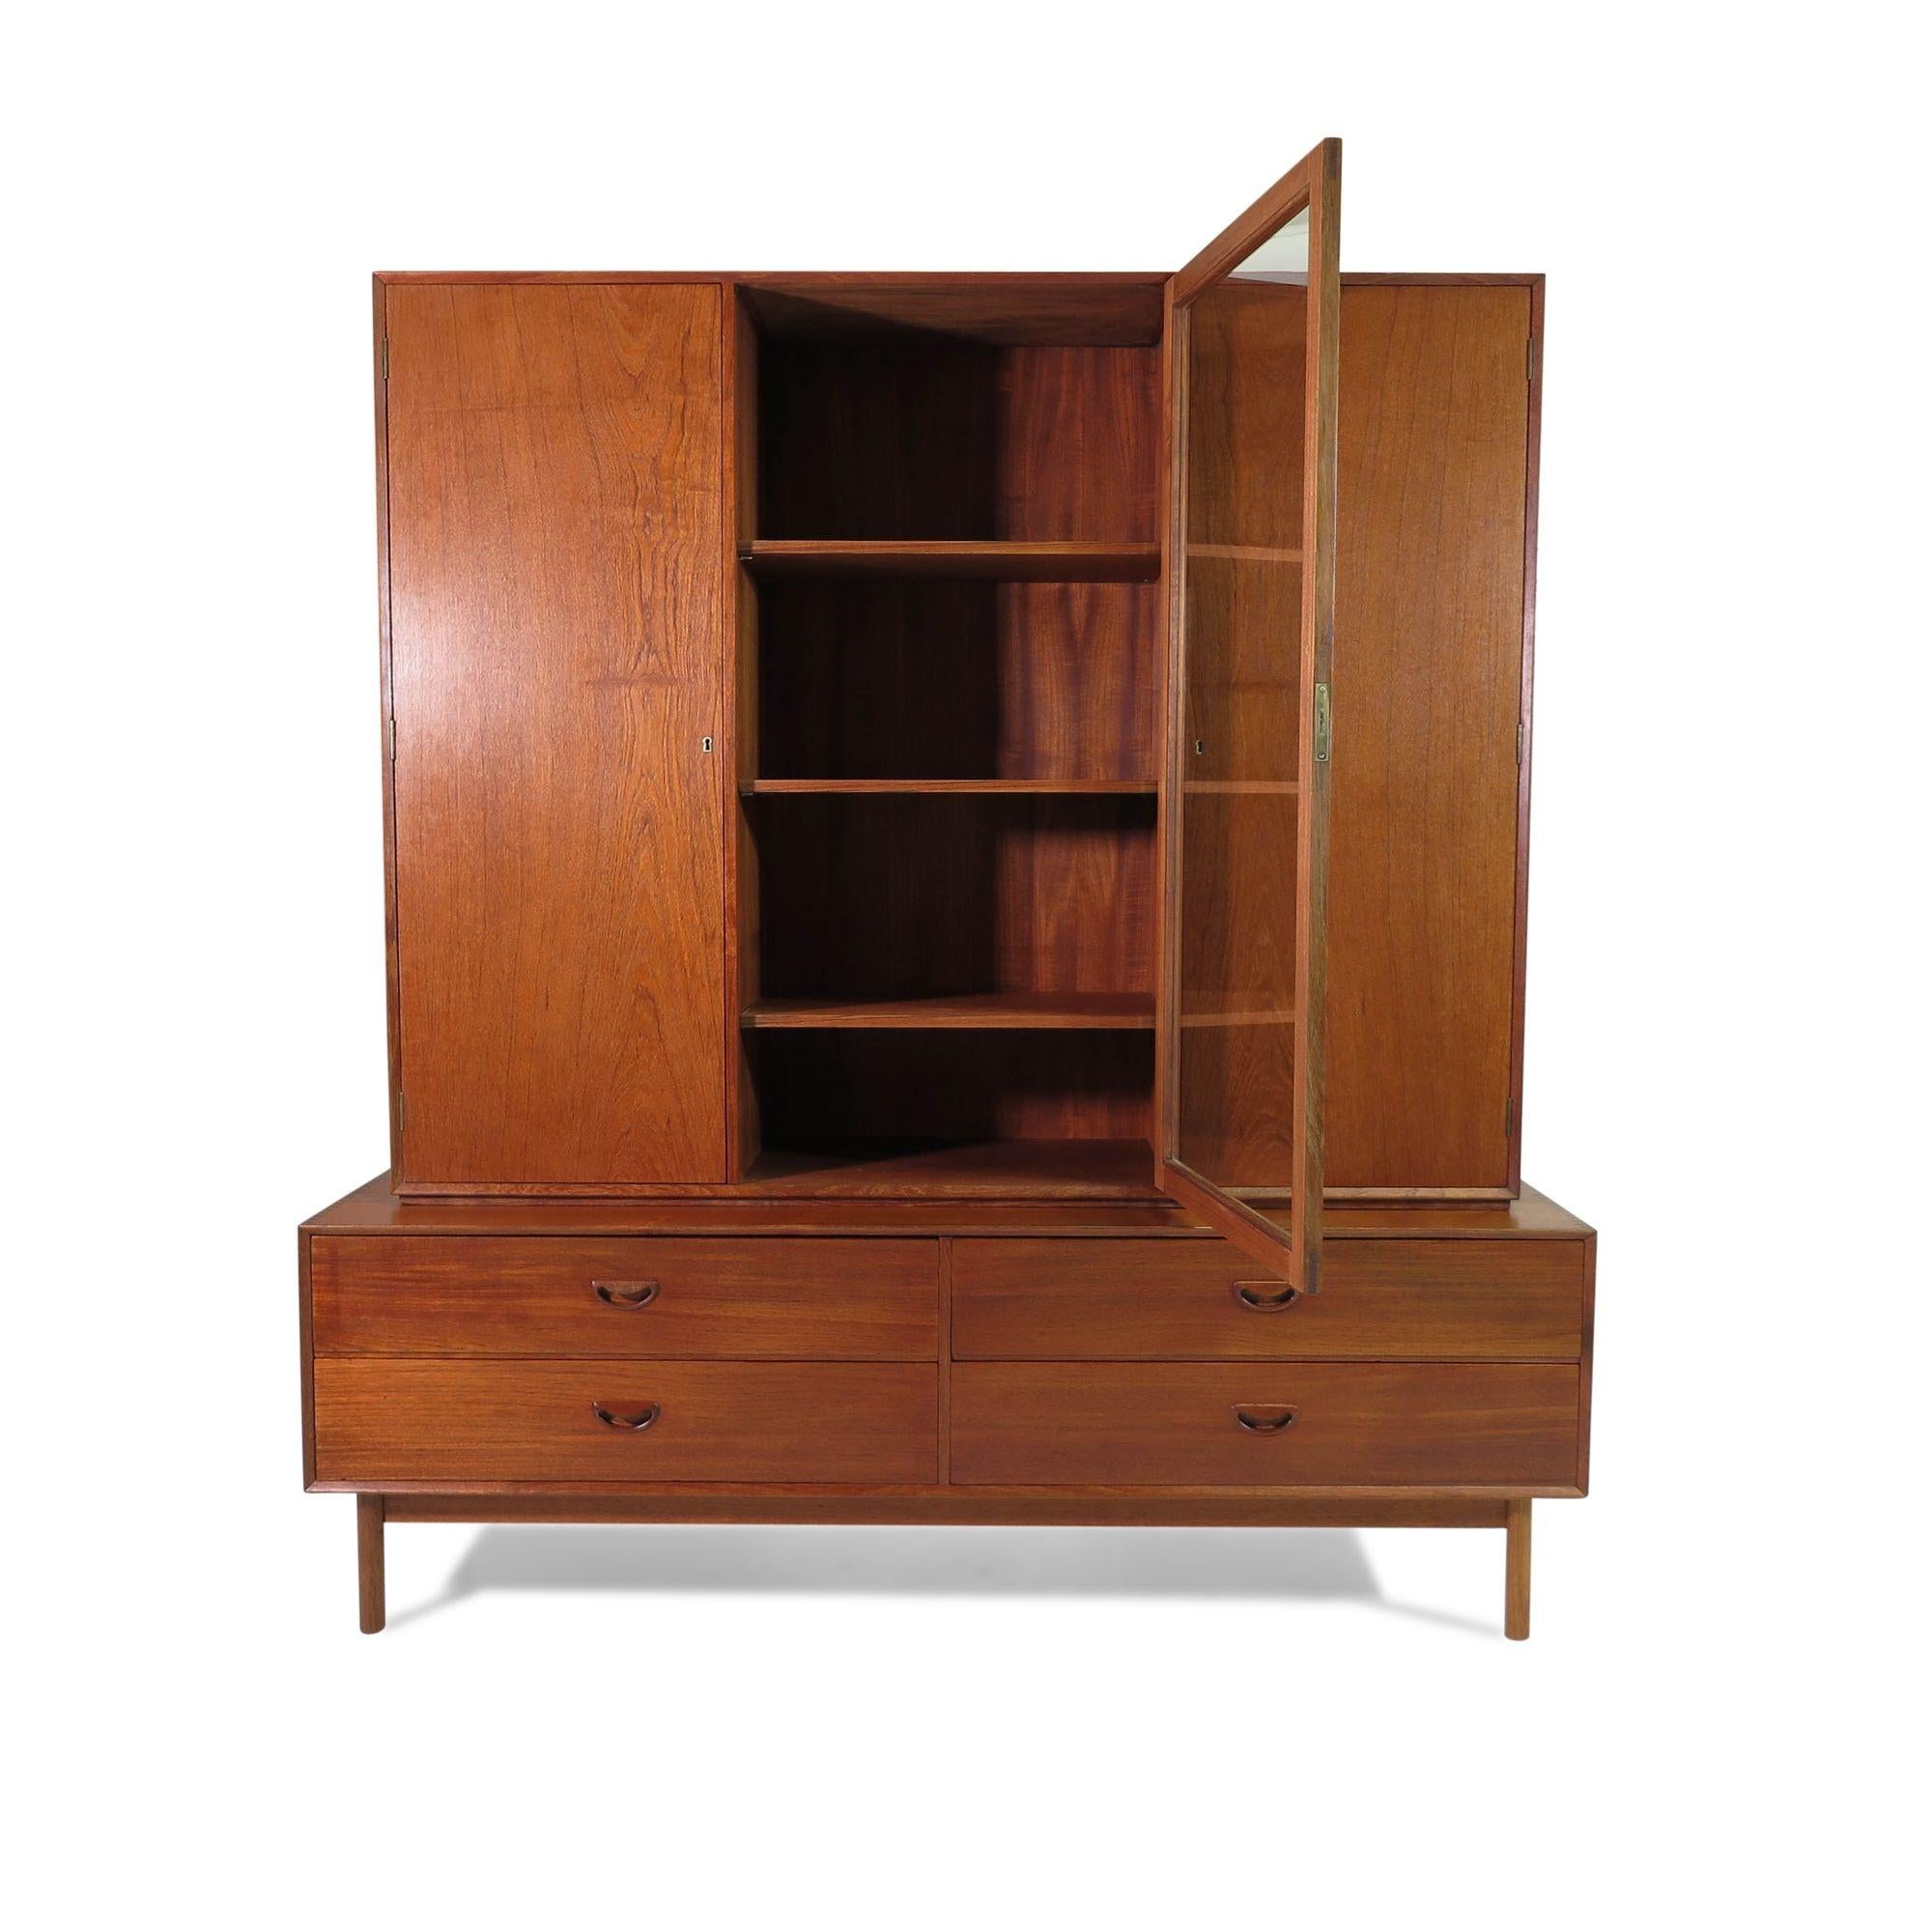 Danish solid teak cabinet designed by Peter Hvidt, 1955, Denmark. This rare design by Peter Hvidt is crafted of solid teak with carved pulls and exposed joinery on edges. Features locking cabinet with doors, over cabinet with four drawers.